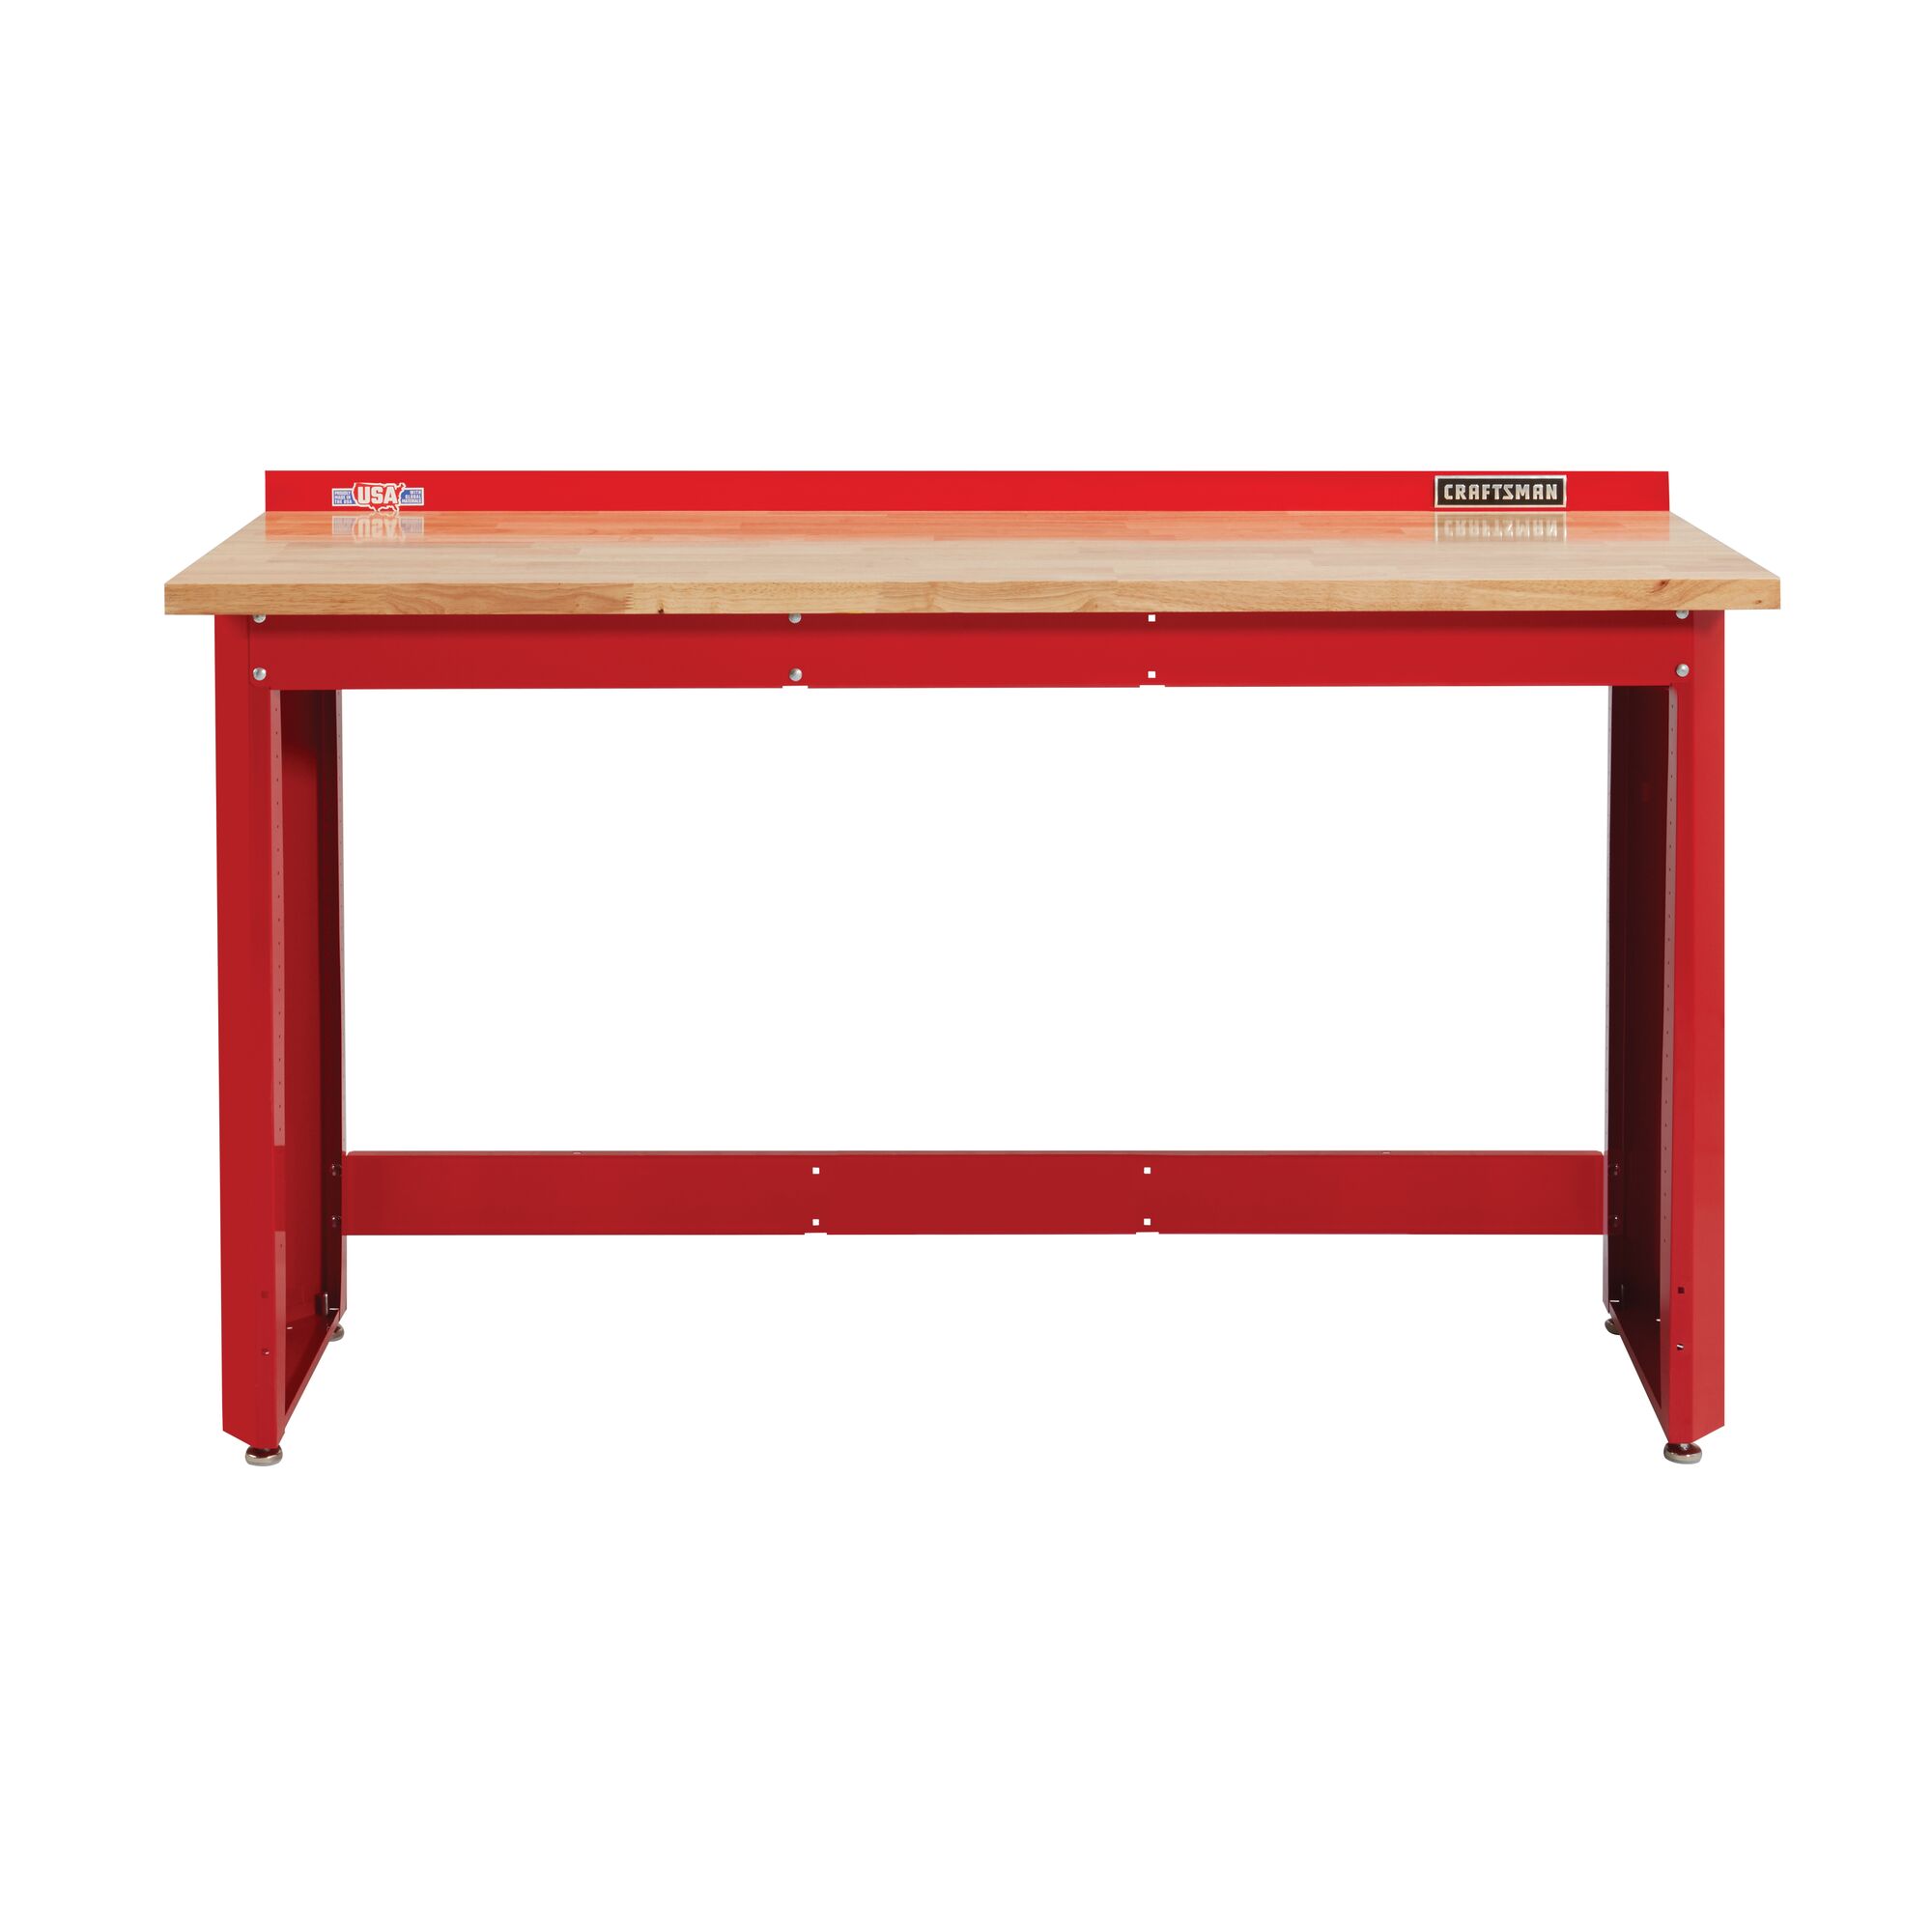 View of CRAFTSMAN Bench & Stationary: Workbench on white background